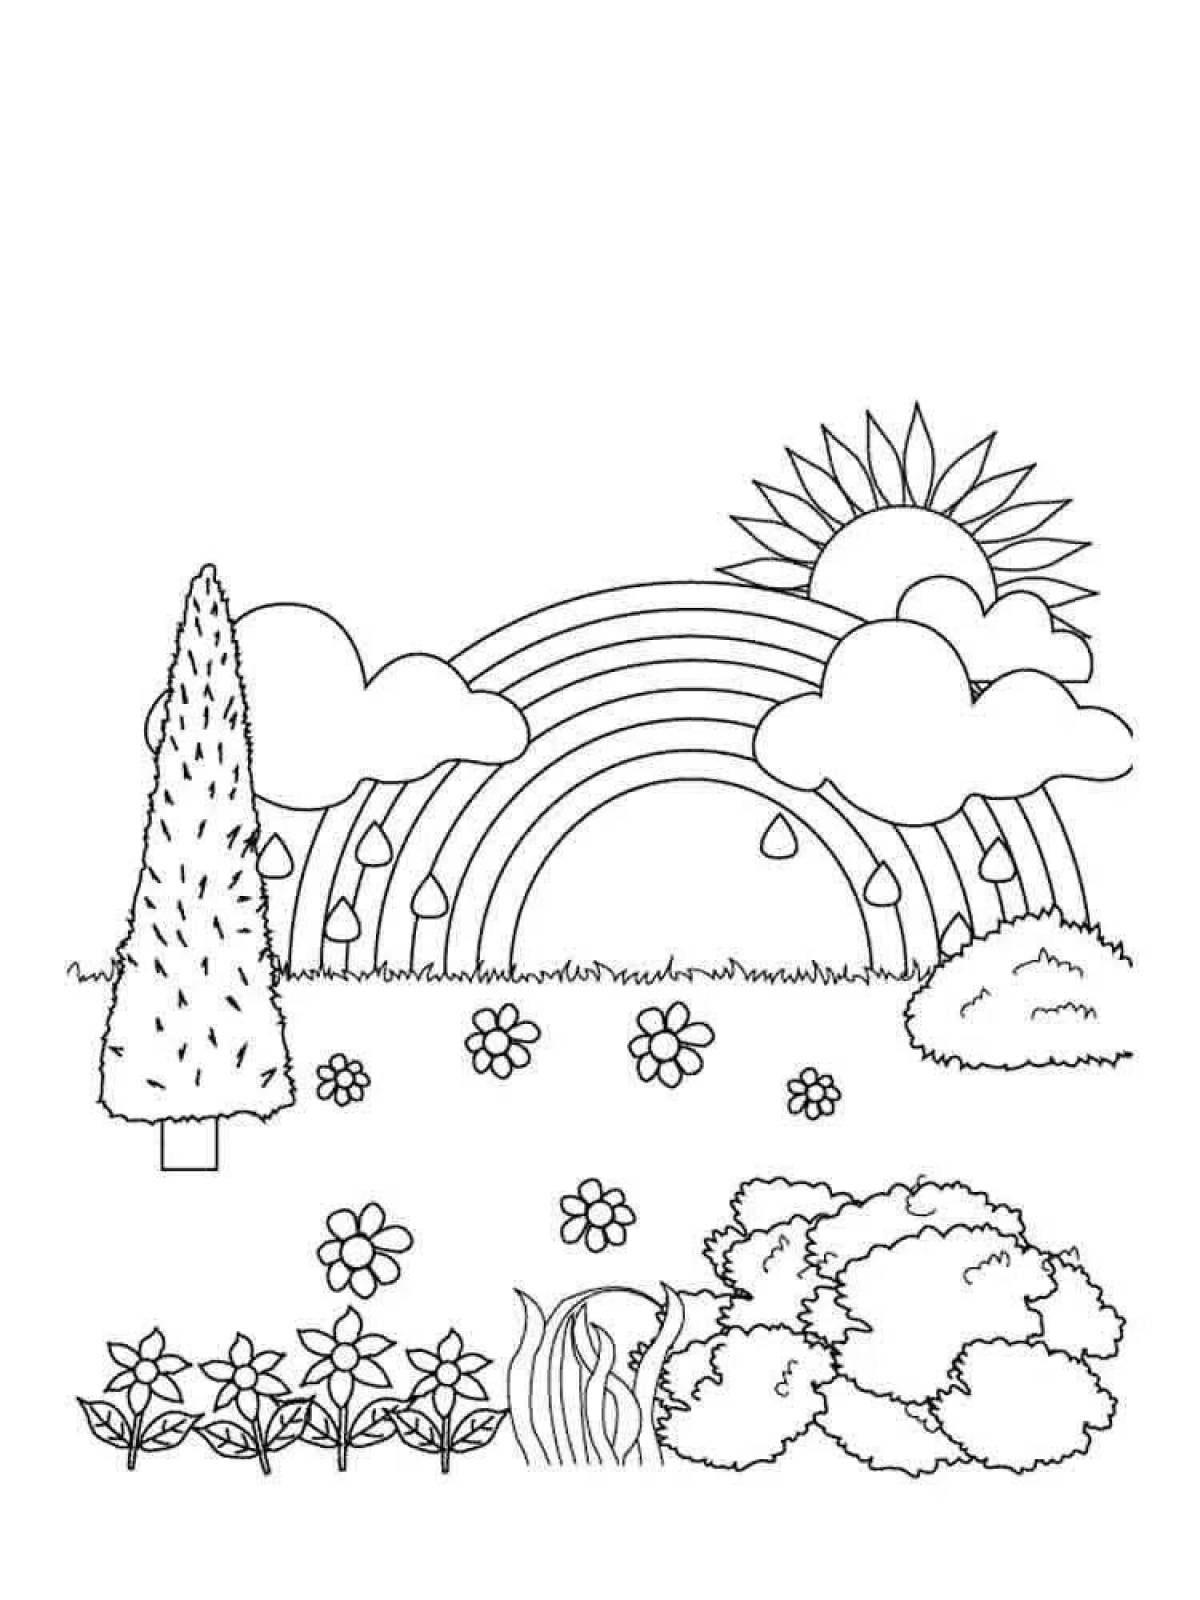 Bright nature coloring pages for kids